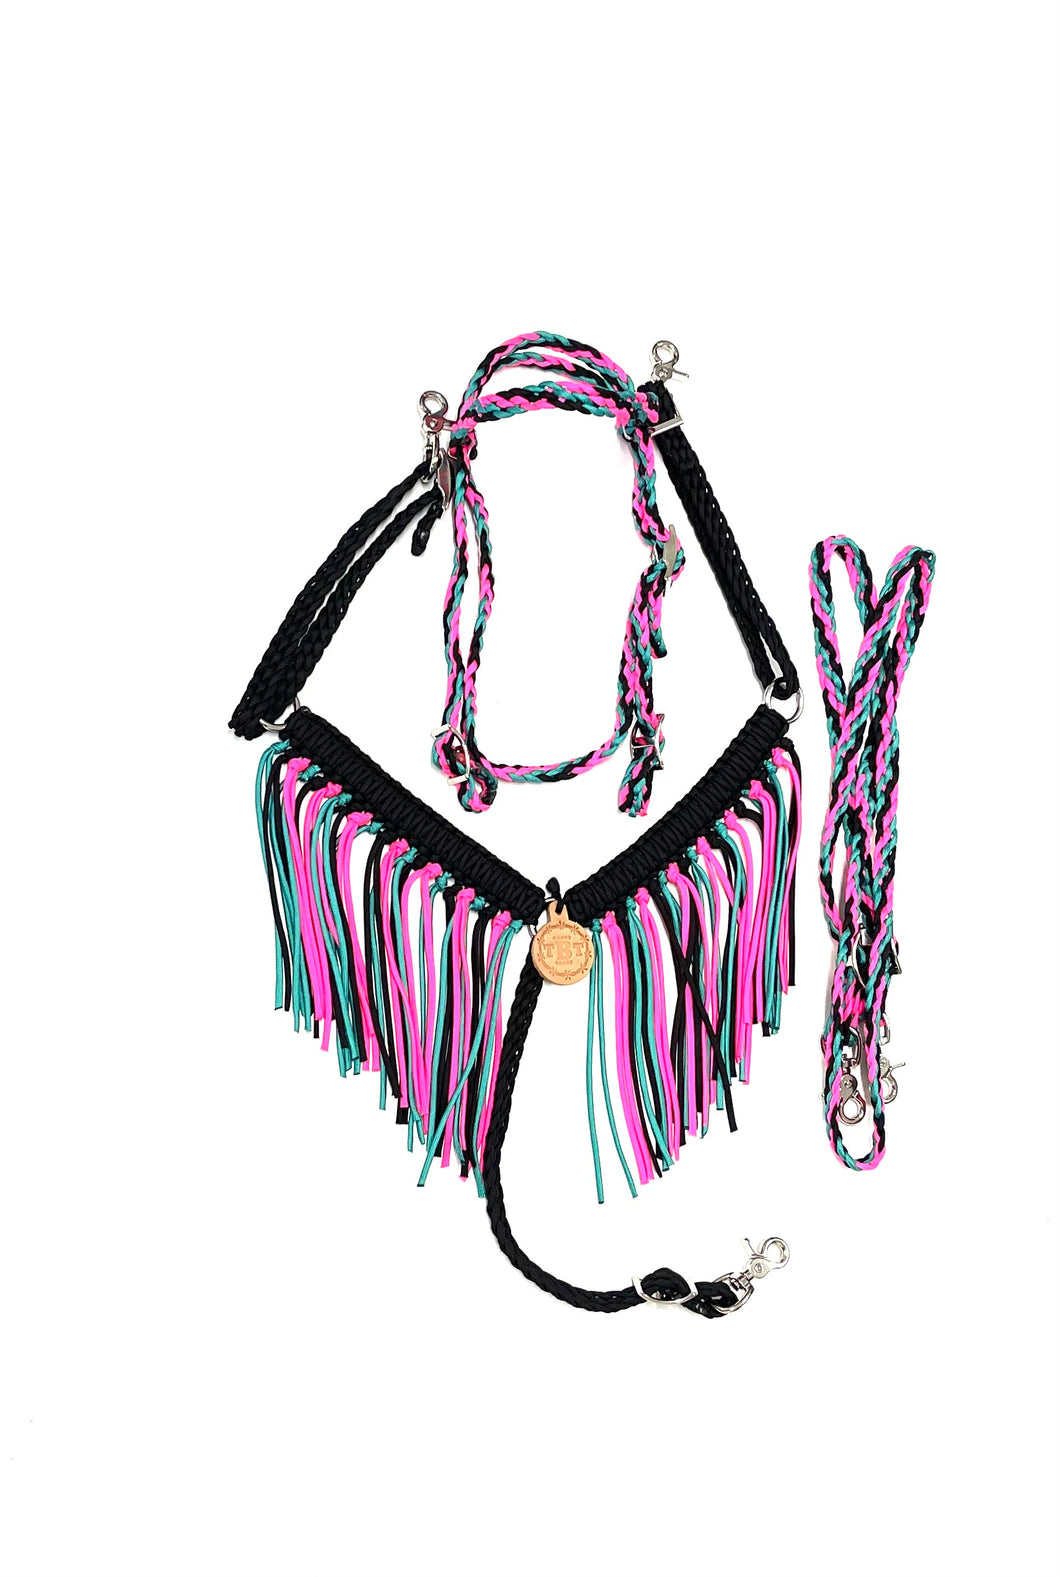 Hot pink, green turquoise, and black horse or pony Tack set